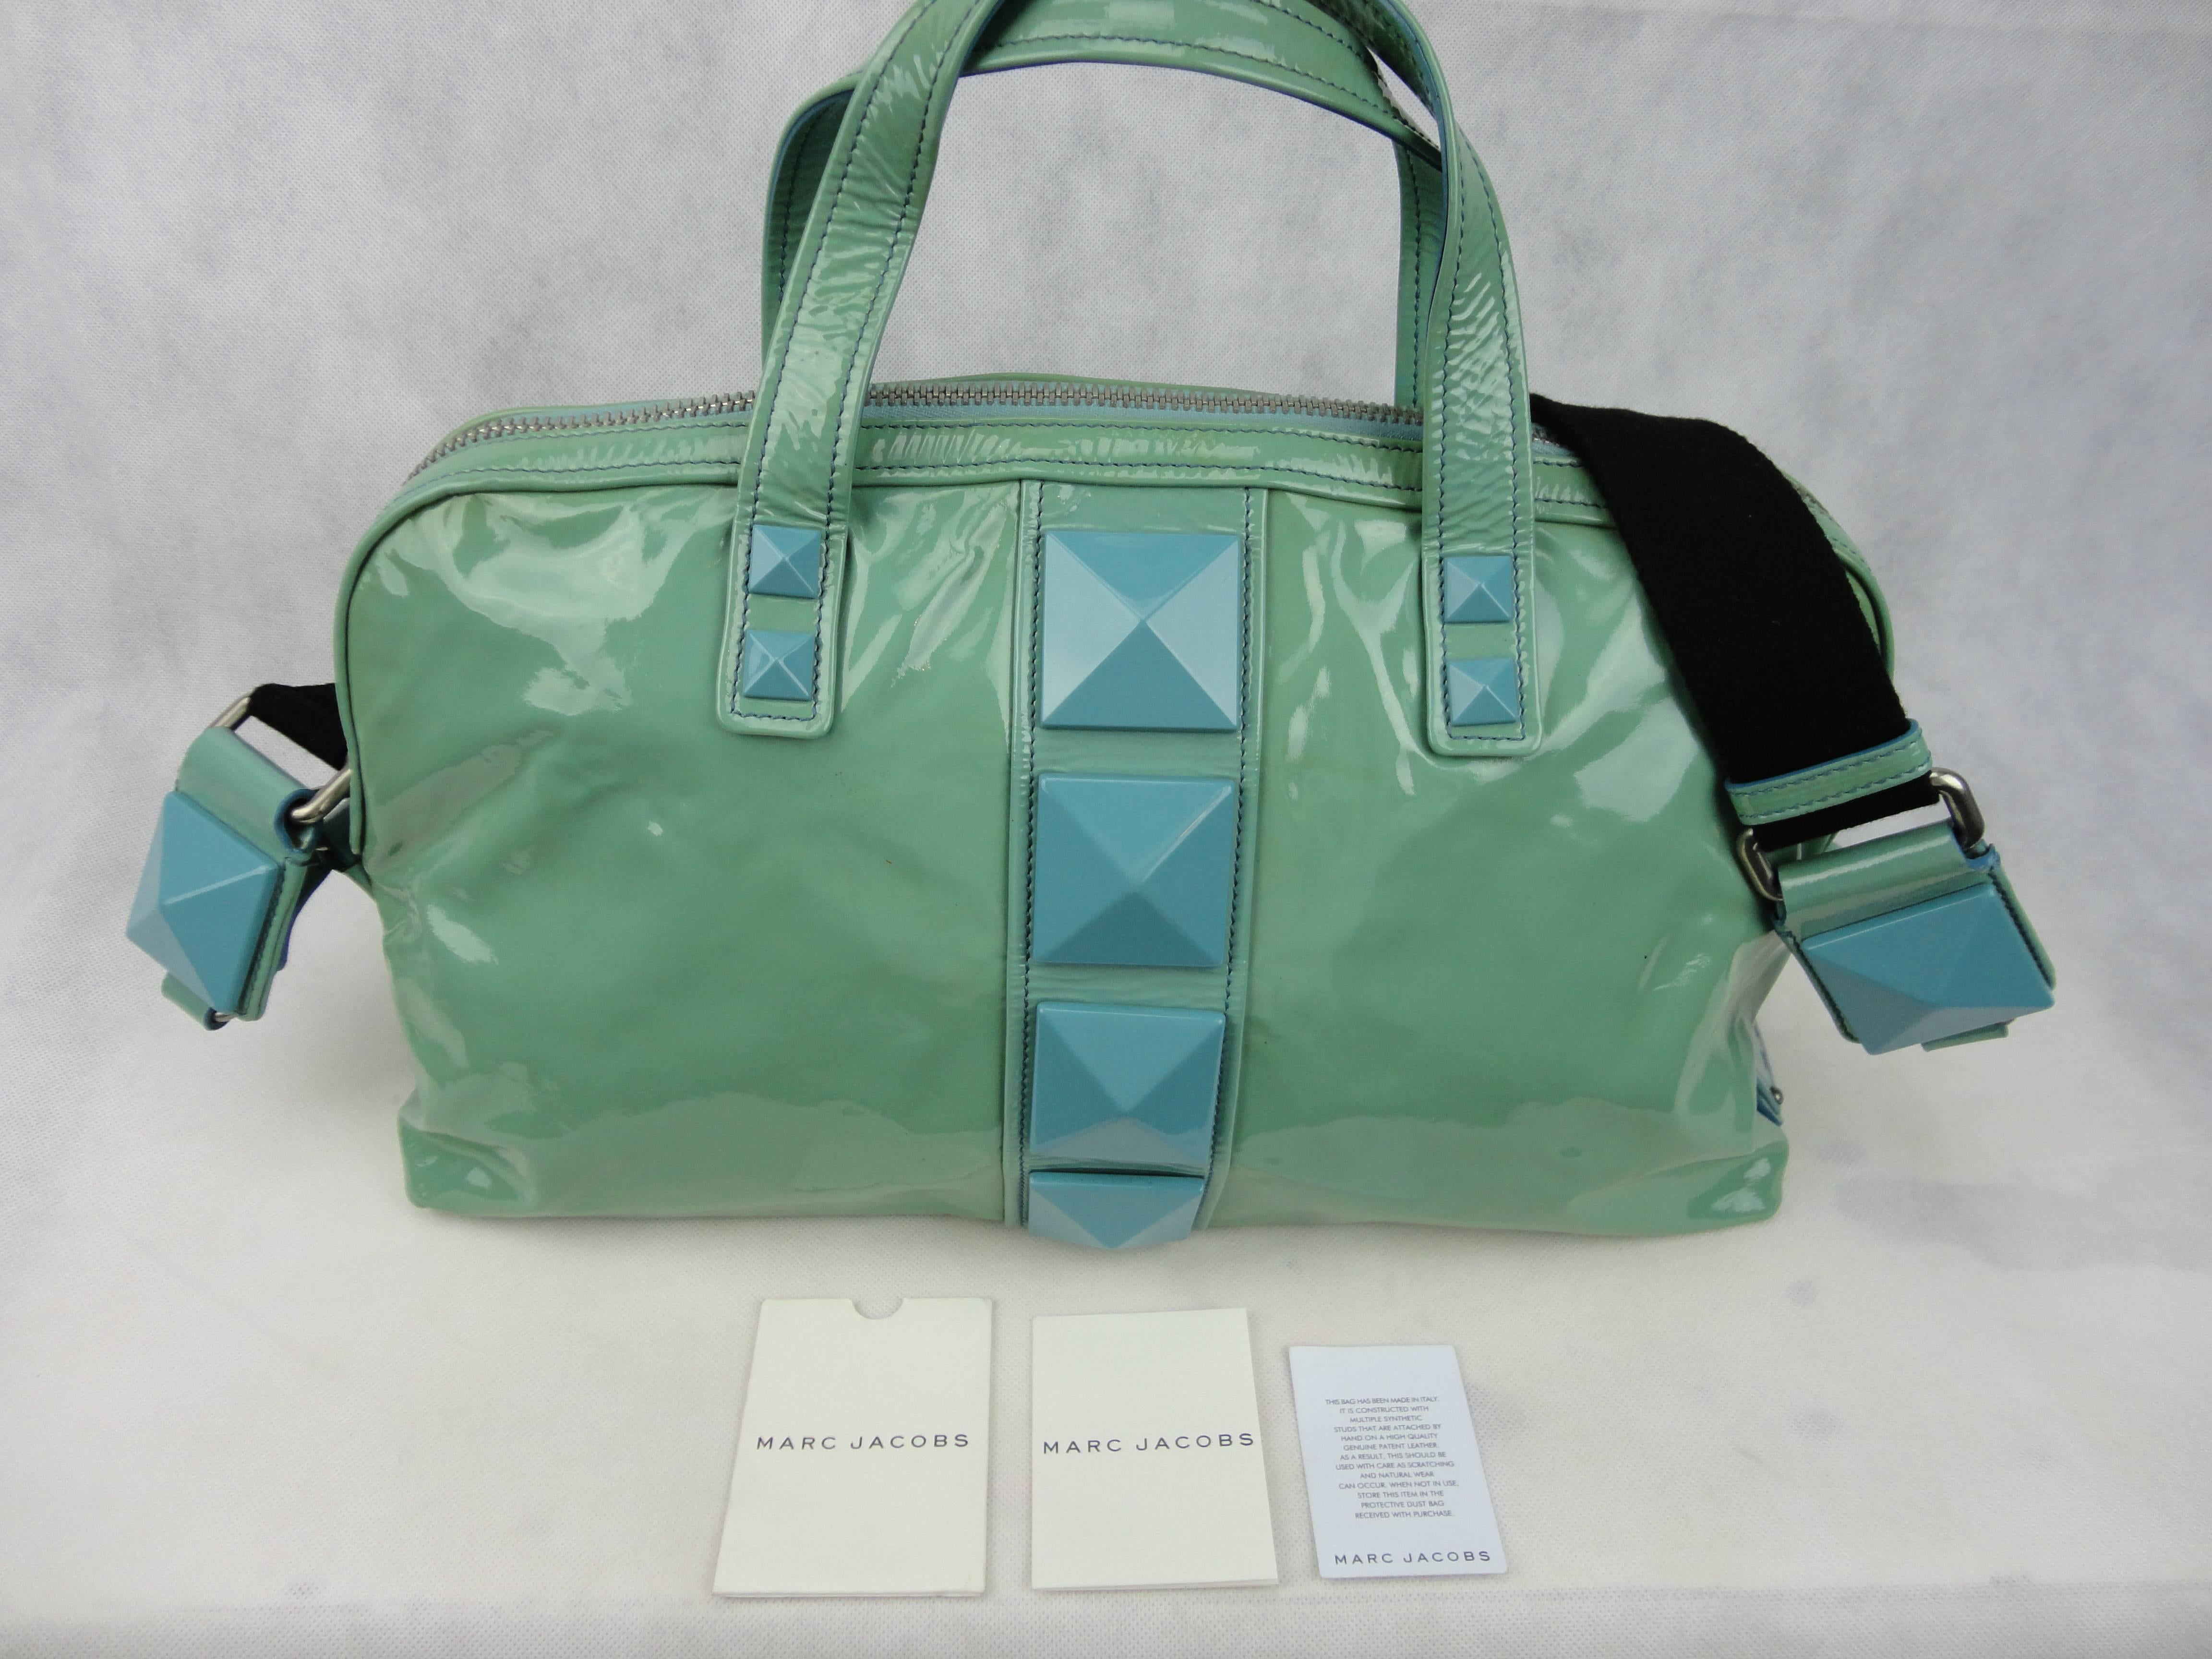 Marc Jacobs collection aqua patent leather tote bag with detachable shoulder strap. The bag is in excellent condition, as it was never used, but I submitted it under fair condition because there are some marks on the leather from being stored,